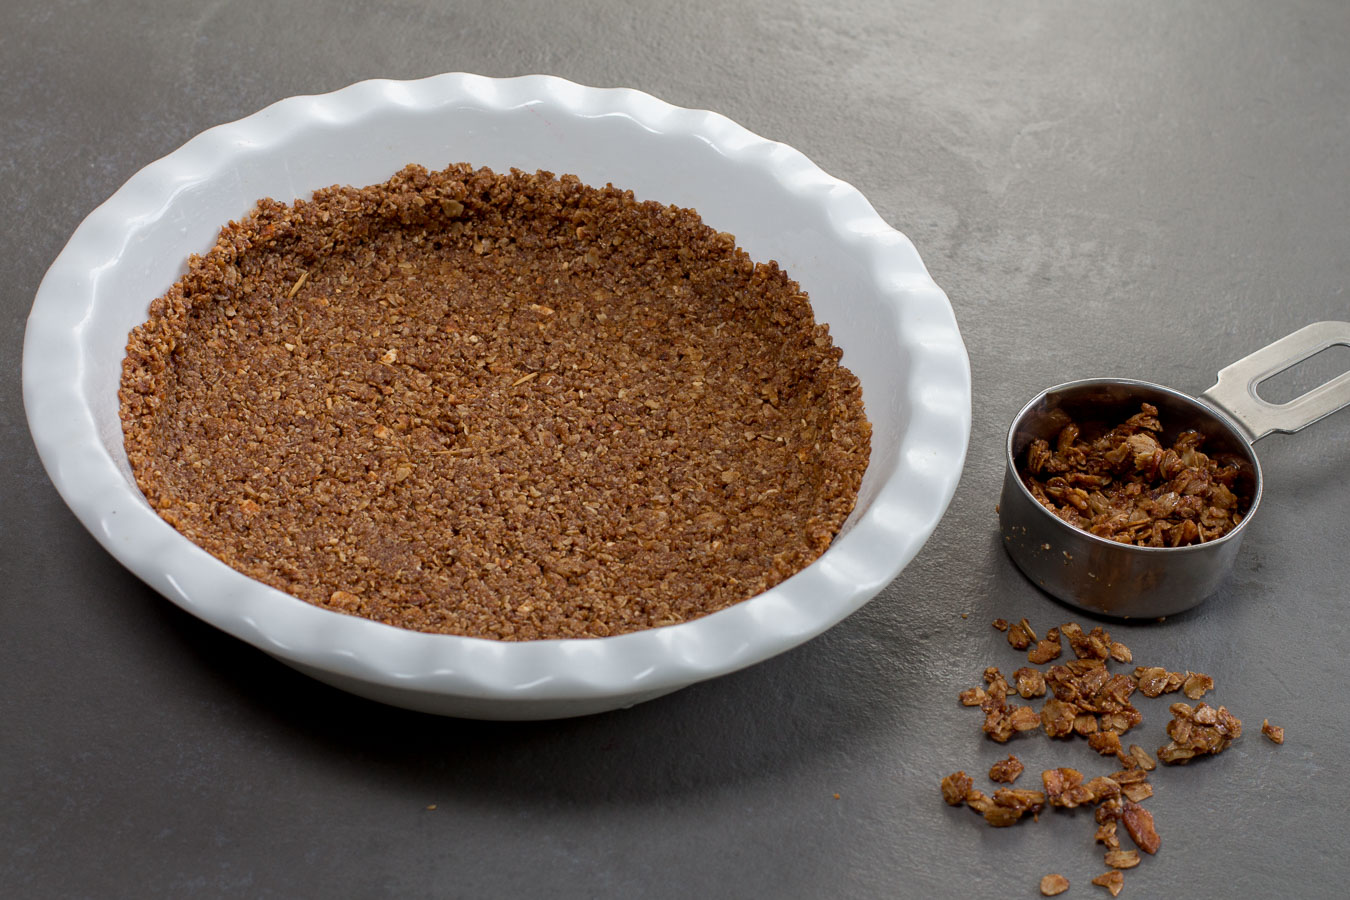 Perfect for snacking, and makes a Pie Crust more delicious than graham cracker crumbs!